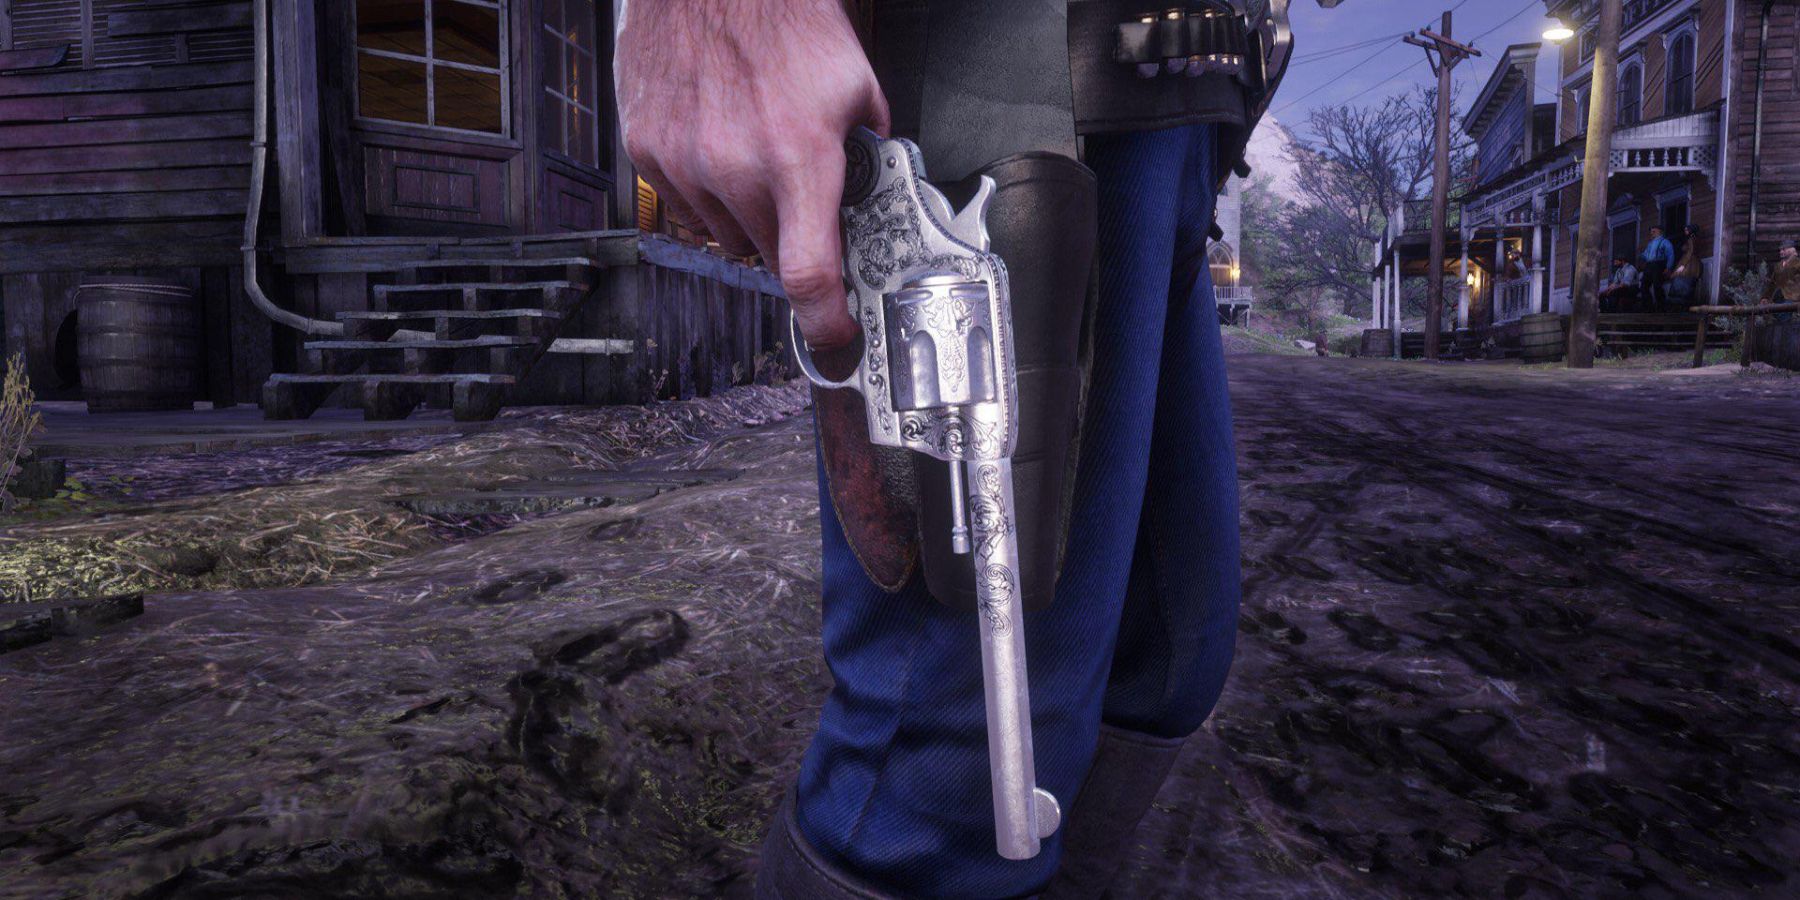 Javier has an ornate Doulbe-Action Revolver with flower petal etchings